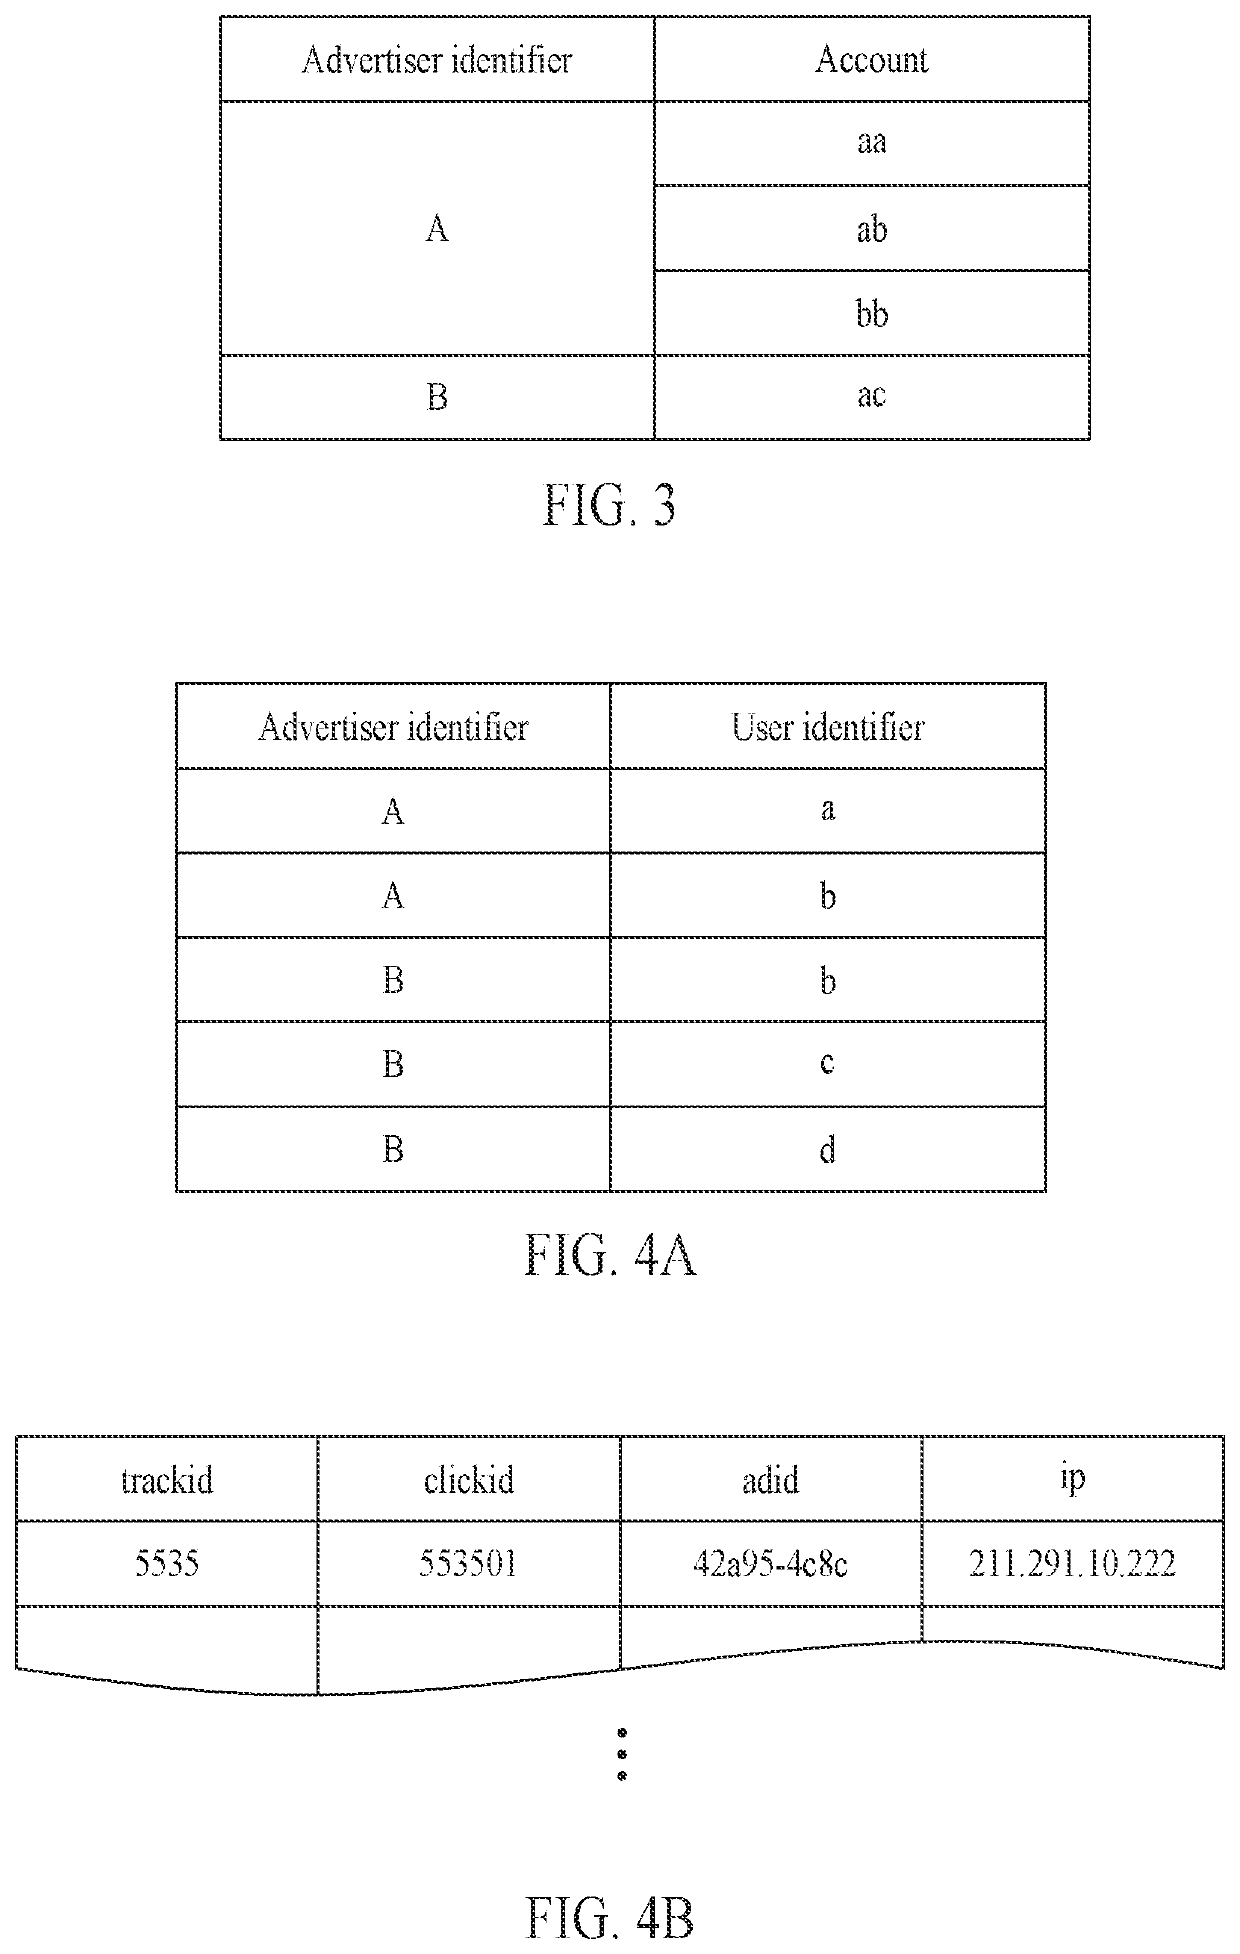 Method and apparatus for tracking conversion of advertisements provided through application